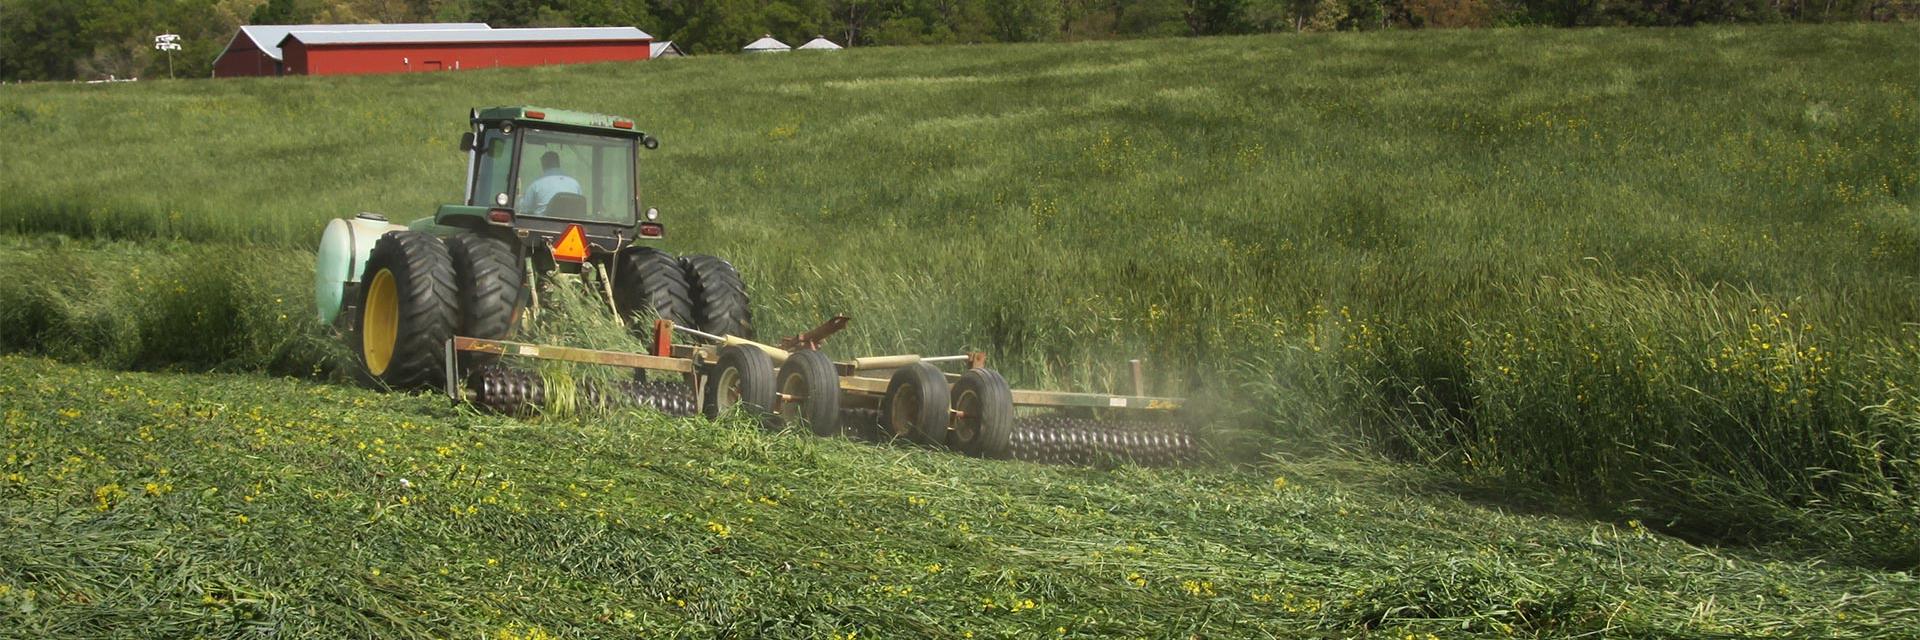 A producer in Stanly County, North Carolina, rolls down a cover crop just minutes before planting corn.